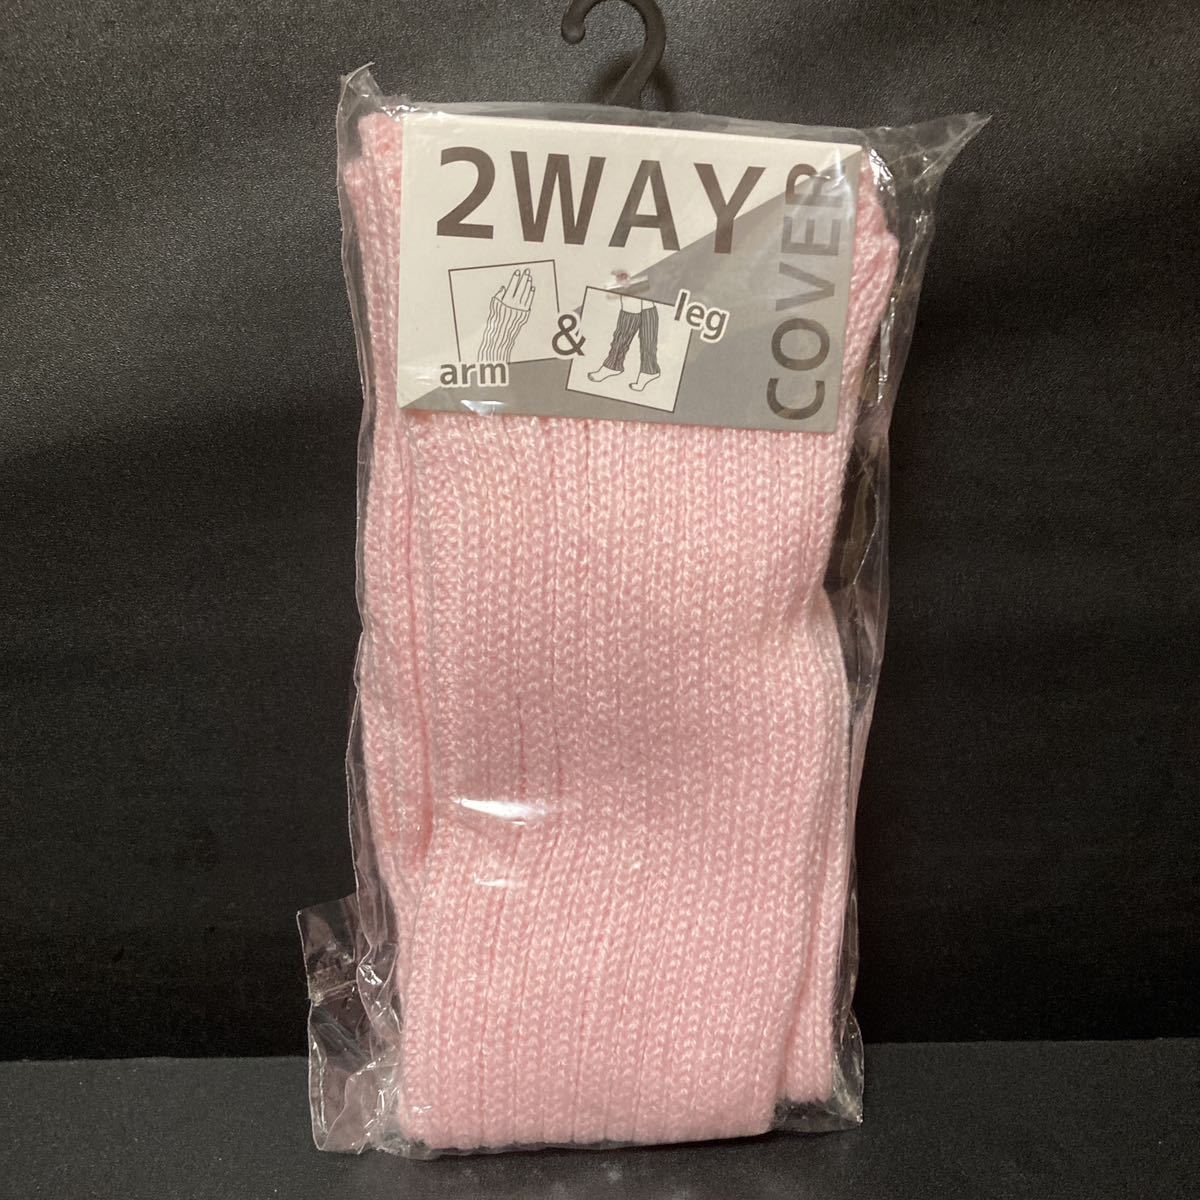 2WAY cover pink arm cover leg warmers goods protection against cold 